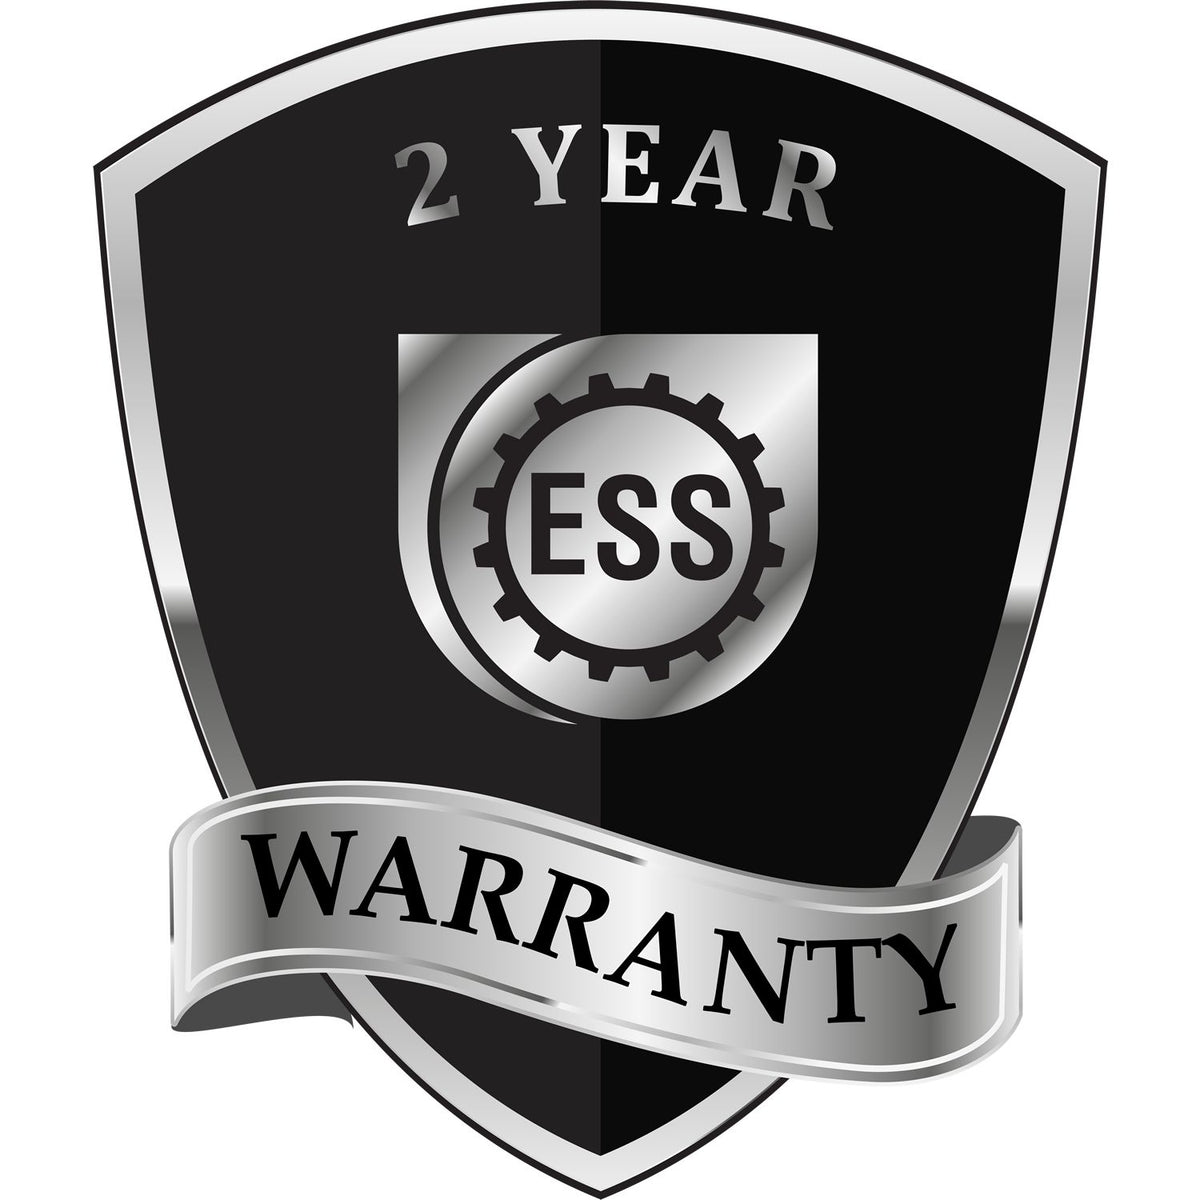 A black and silver badge or emblem showing warranty information for the State of Missouri Extended Long Reach Geologist Seal